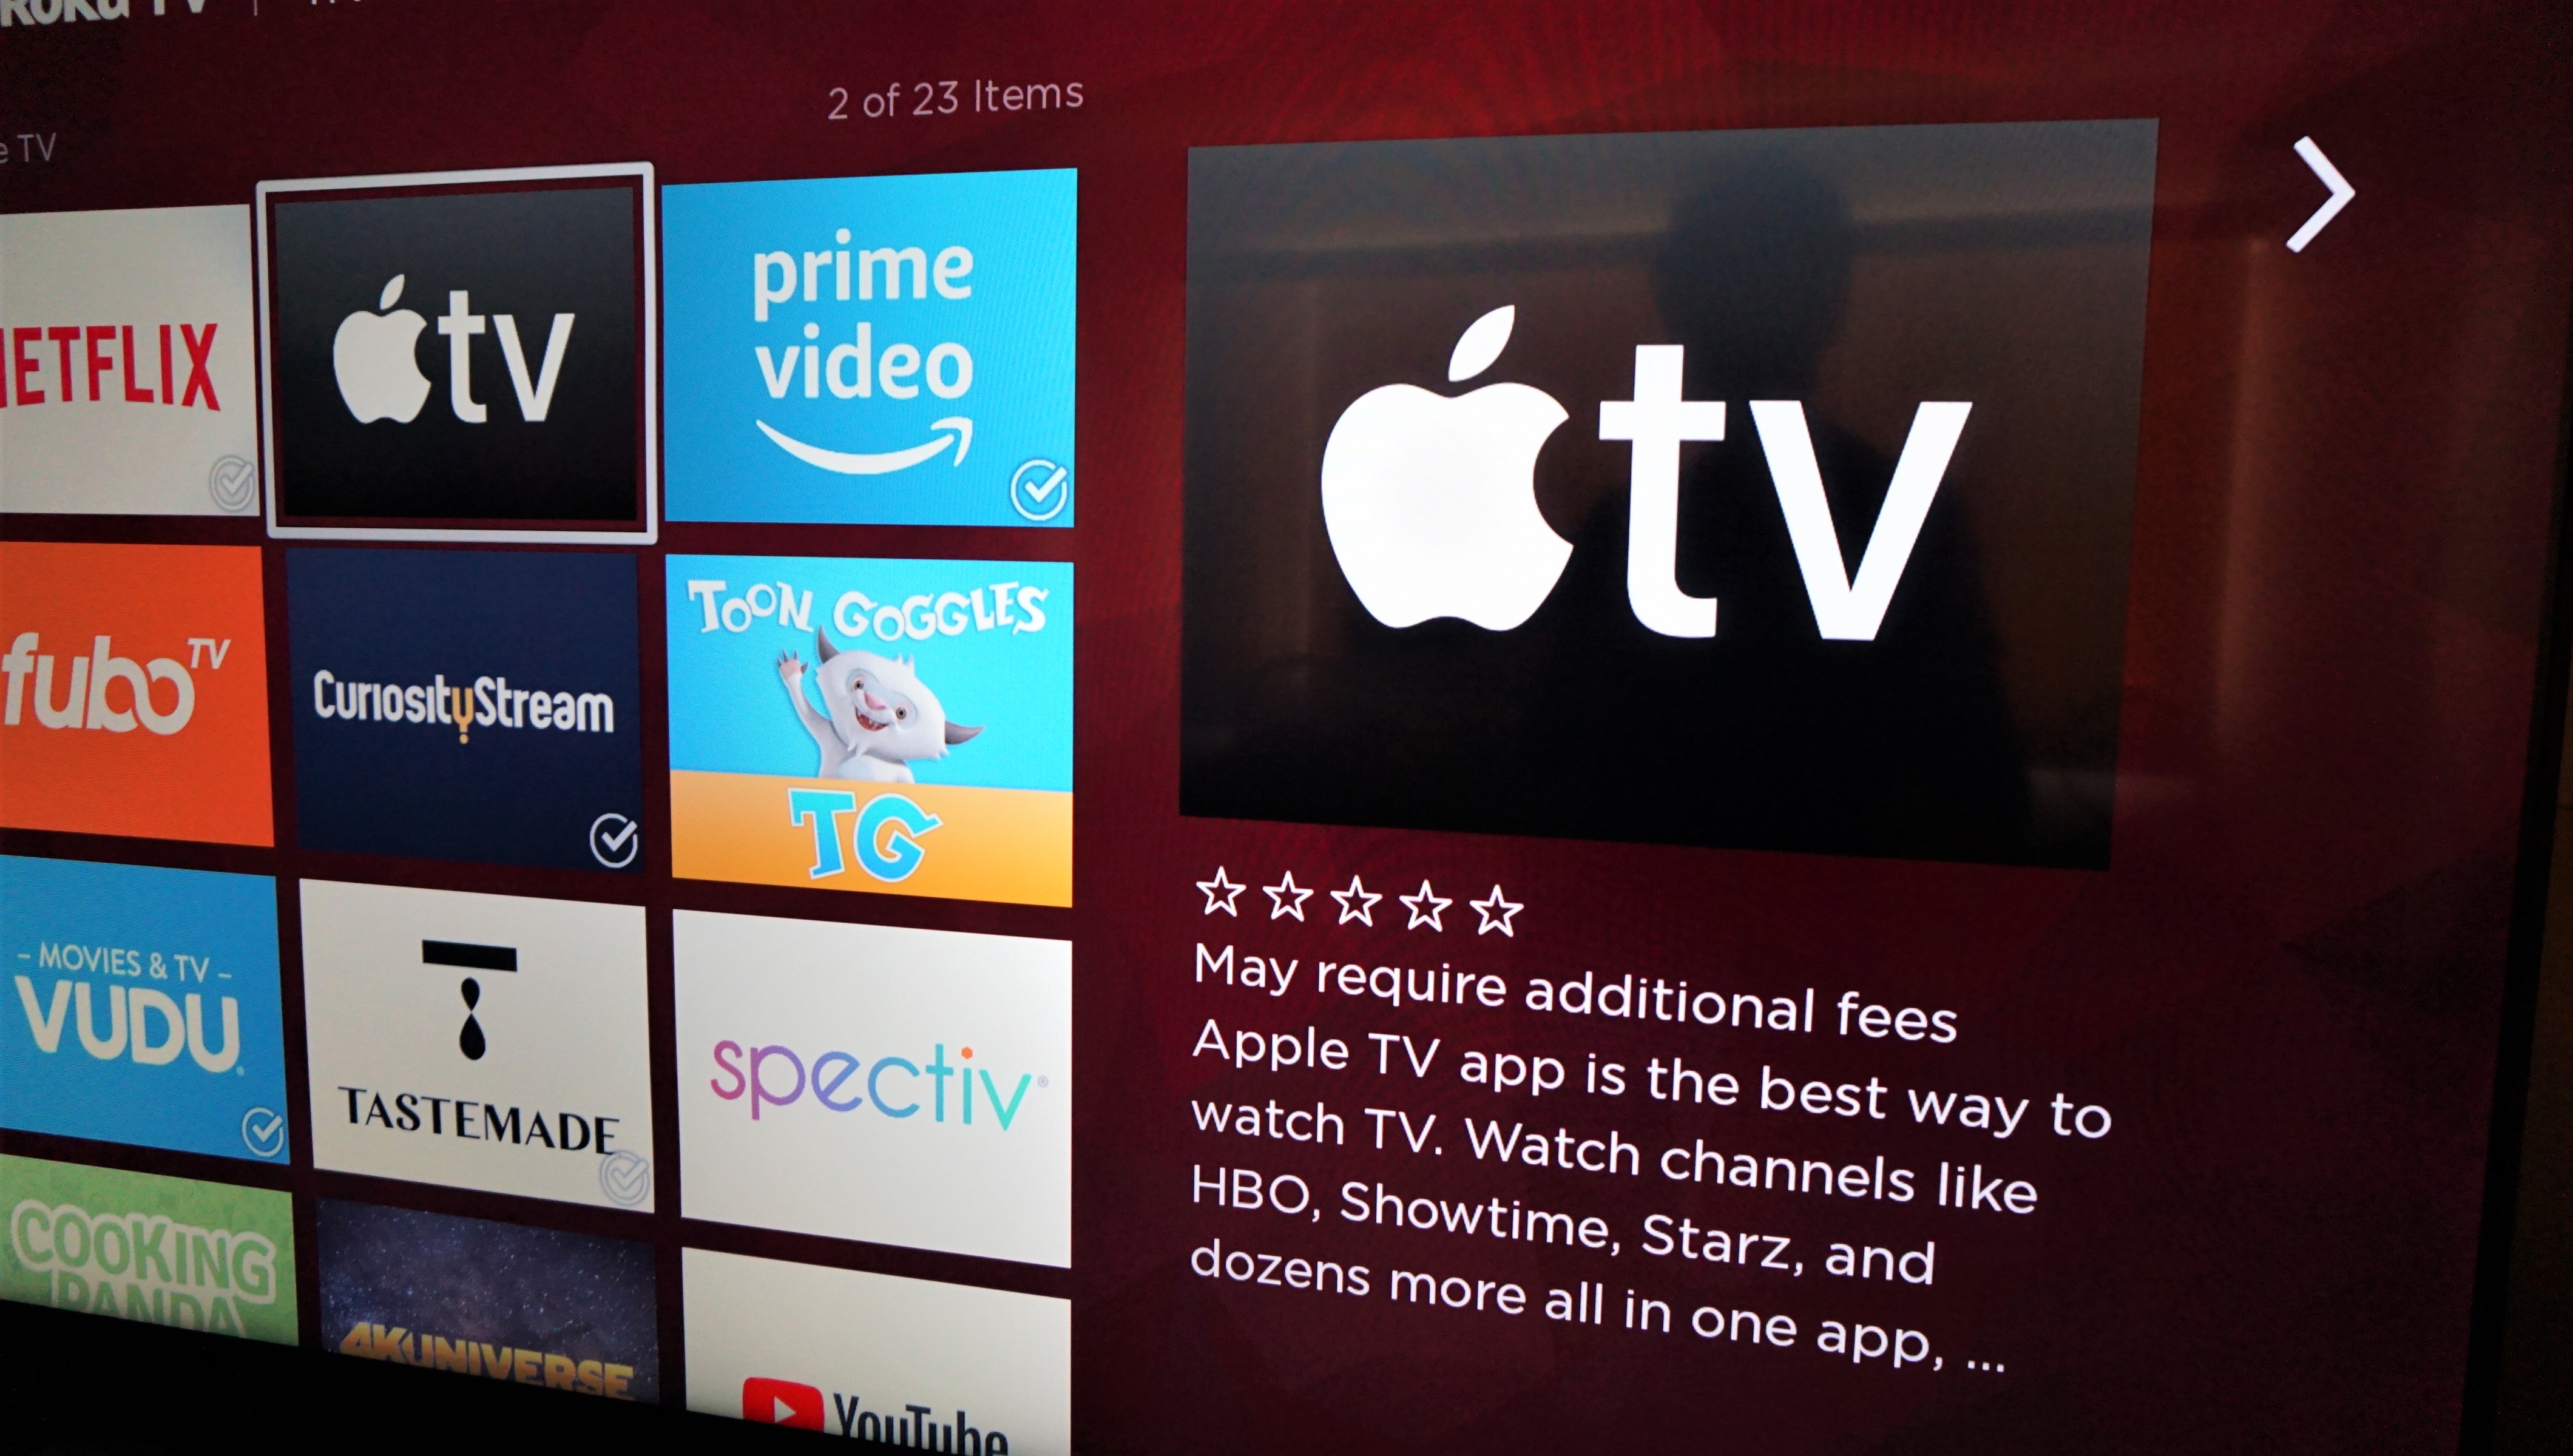 Apple TV app is now available on Amazon Fire TV devices in the UK